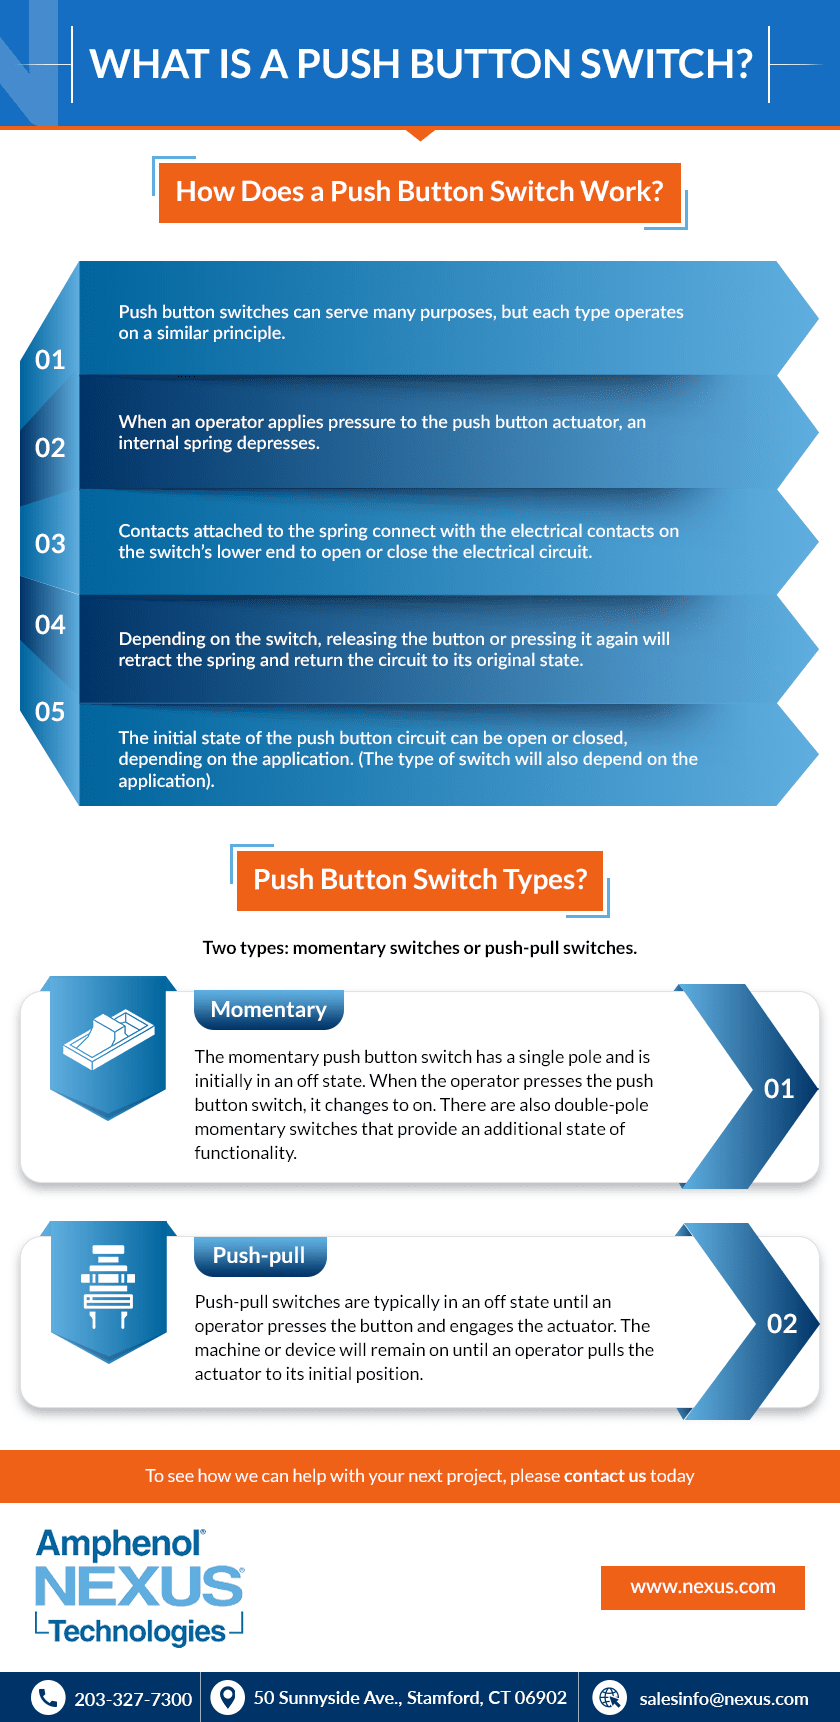 An infographic describing push button switches